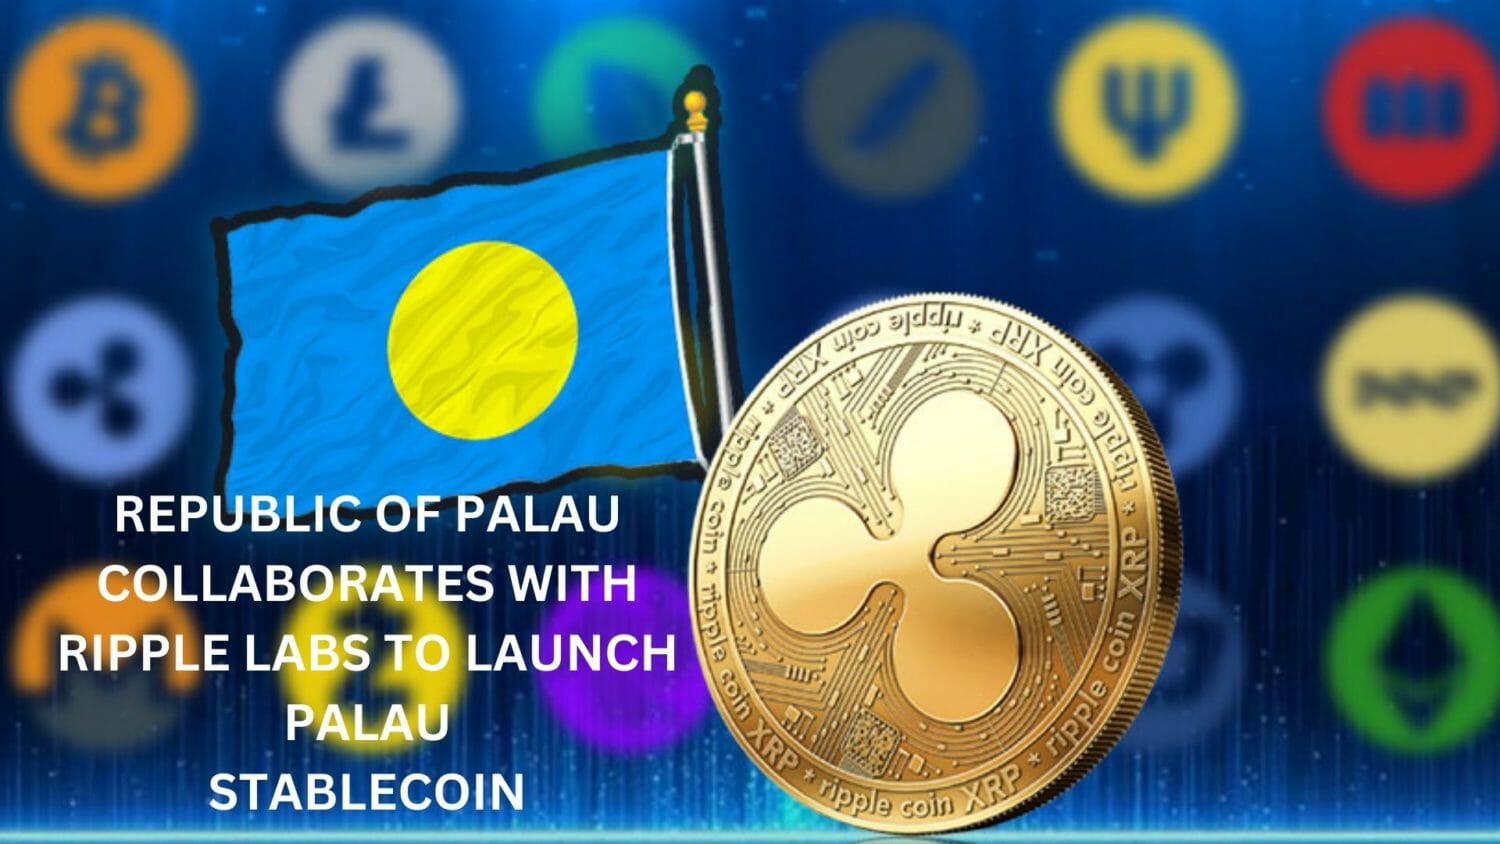 Republic Of Palau Collaborates With Ripple Labs To Launch Palau Stablecoin